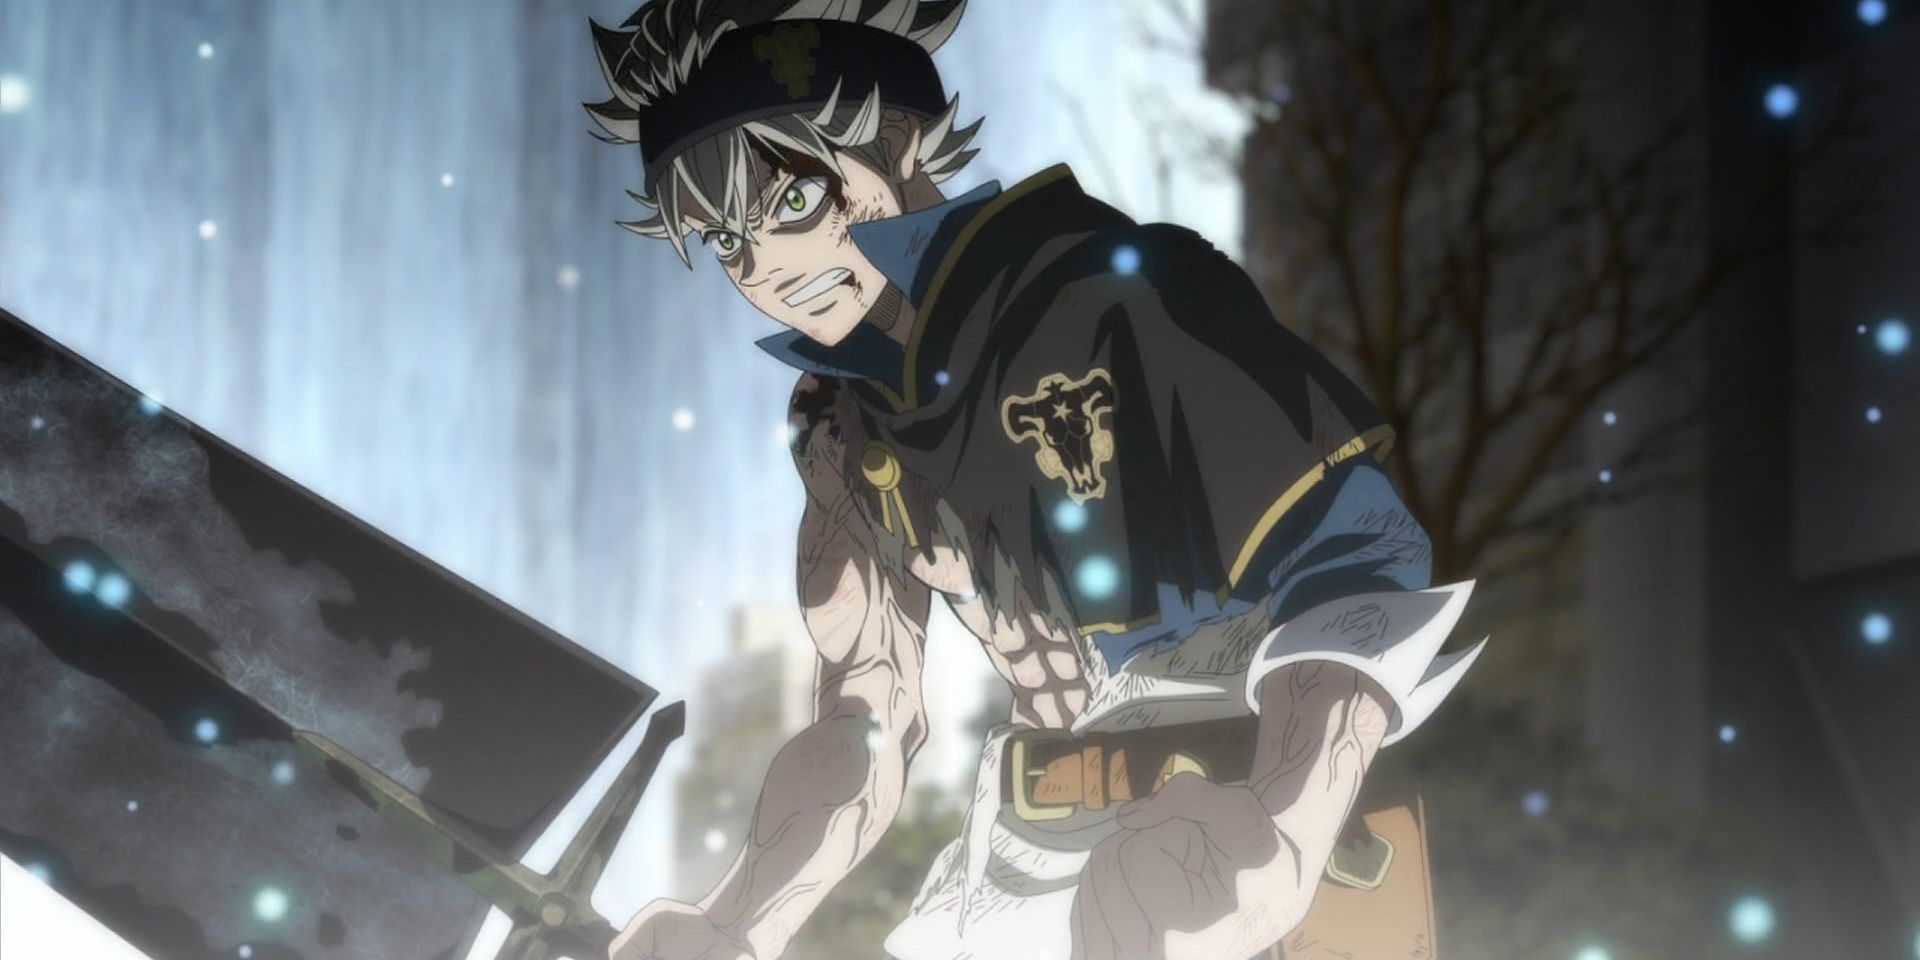 asta, protagonist from the anime black clover, standing among light energy